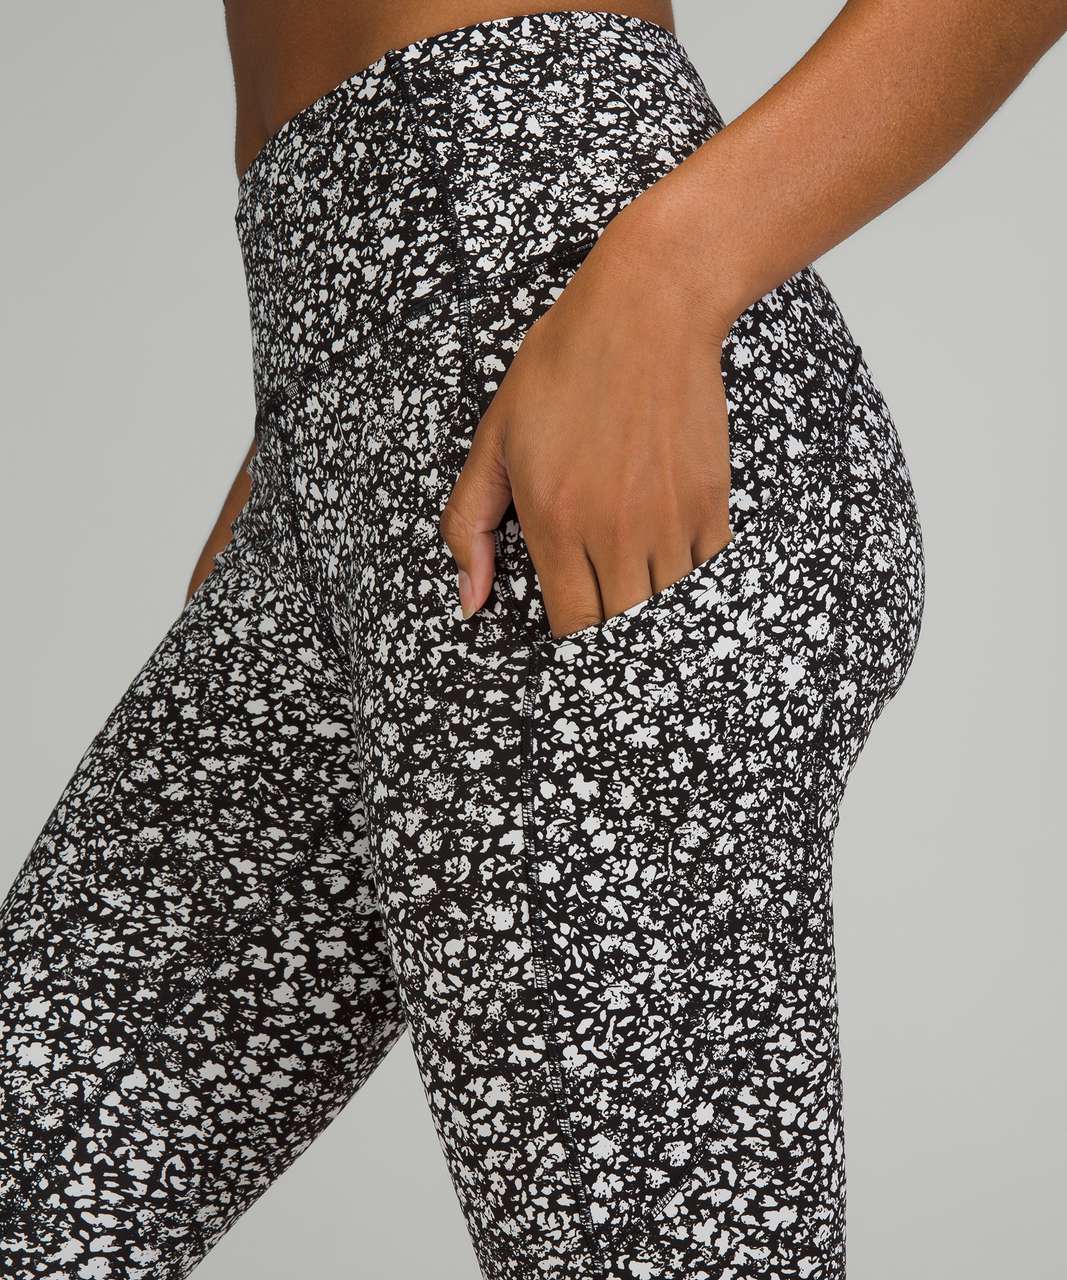 Lululemon Fast and Free High-Rise Tight 25" *Nulux - Venture Floral Alpine White Black